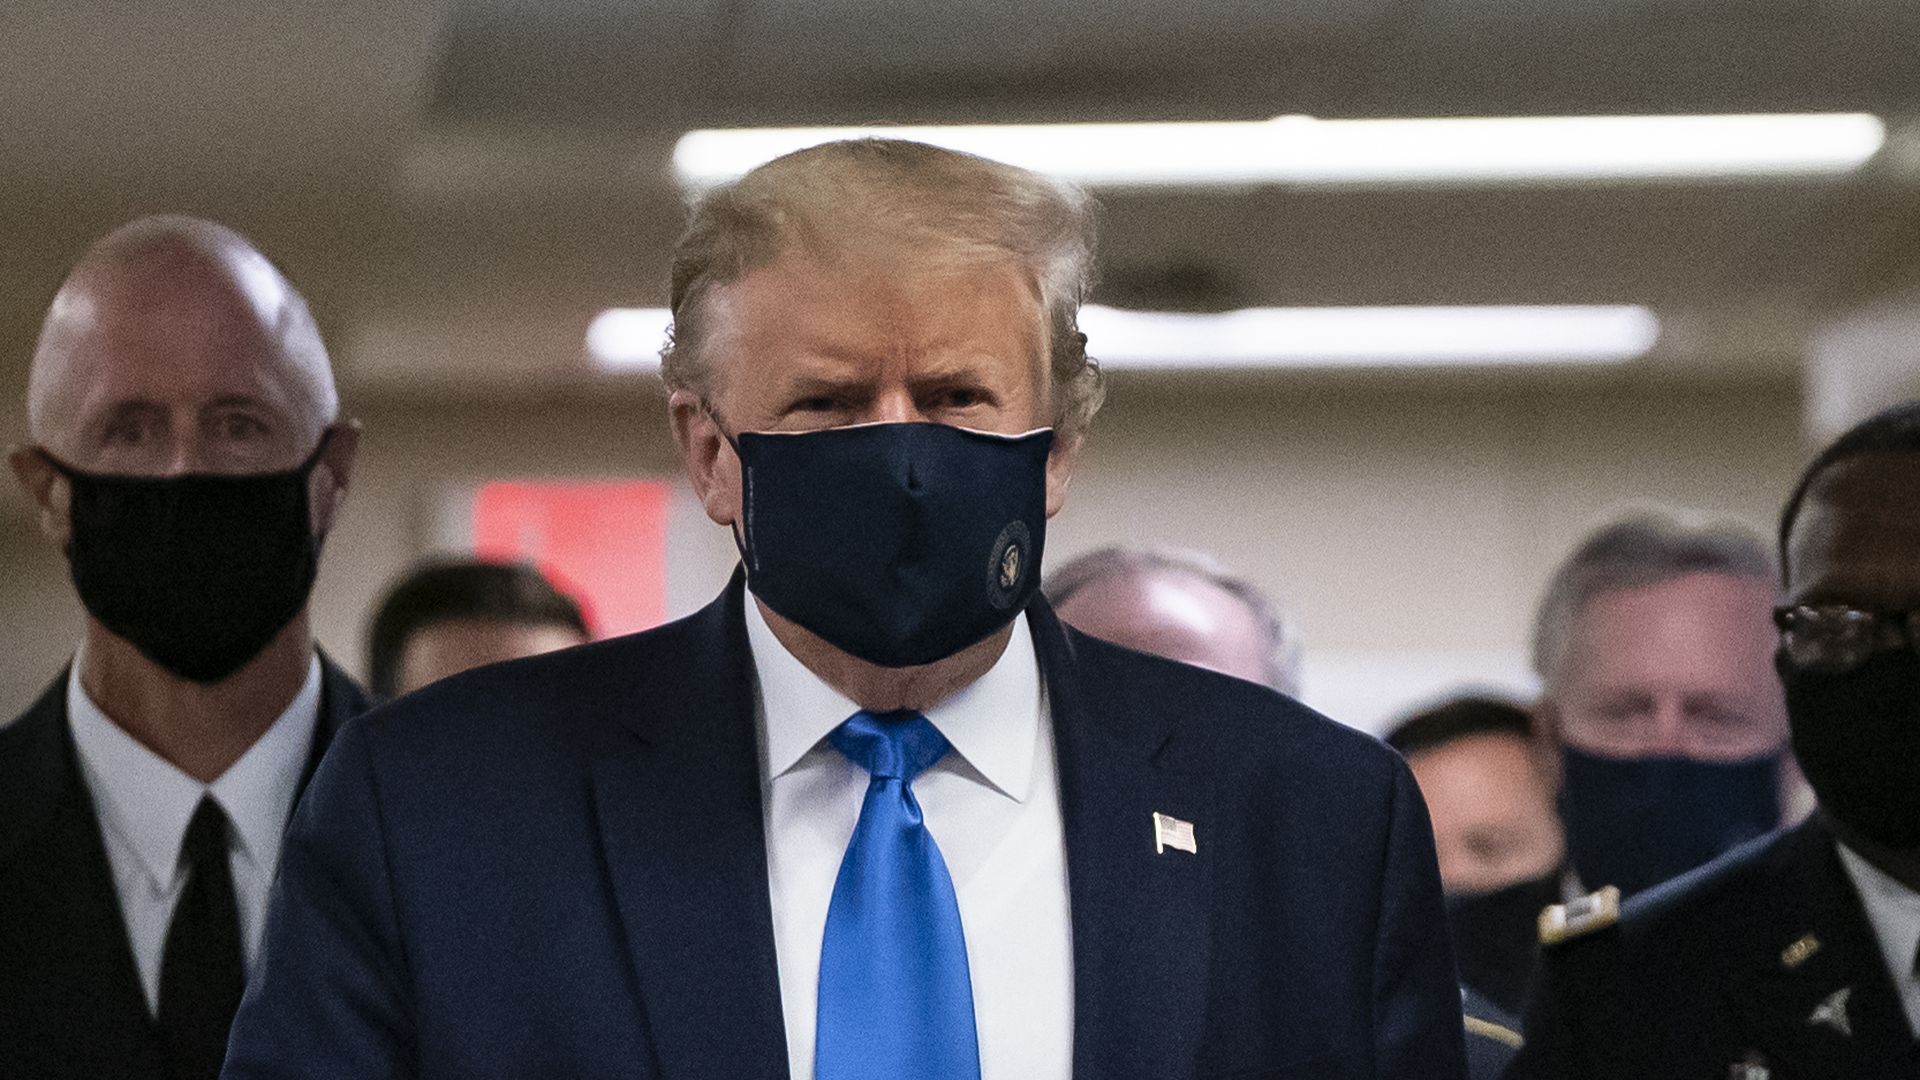 Trump wearing a face mask in Walter Reed on July 11.